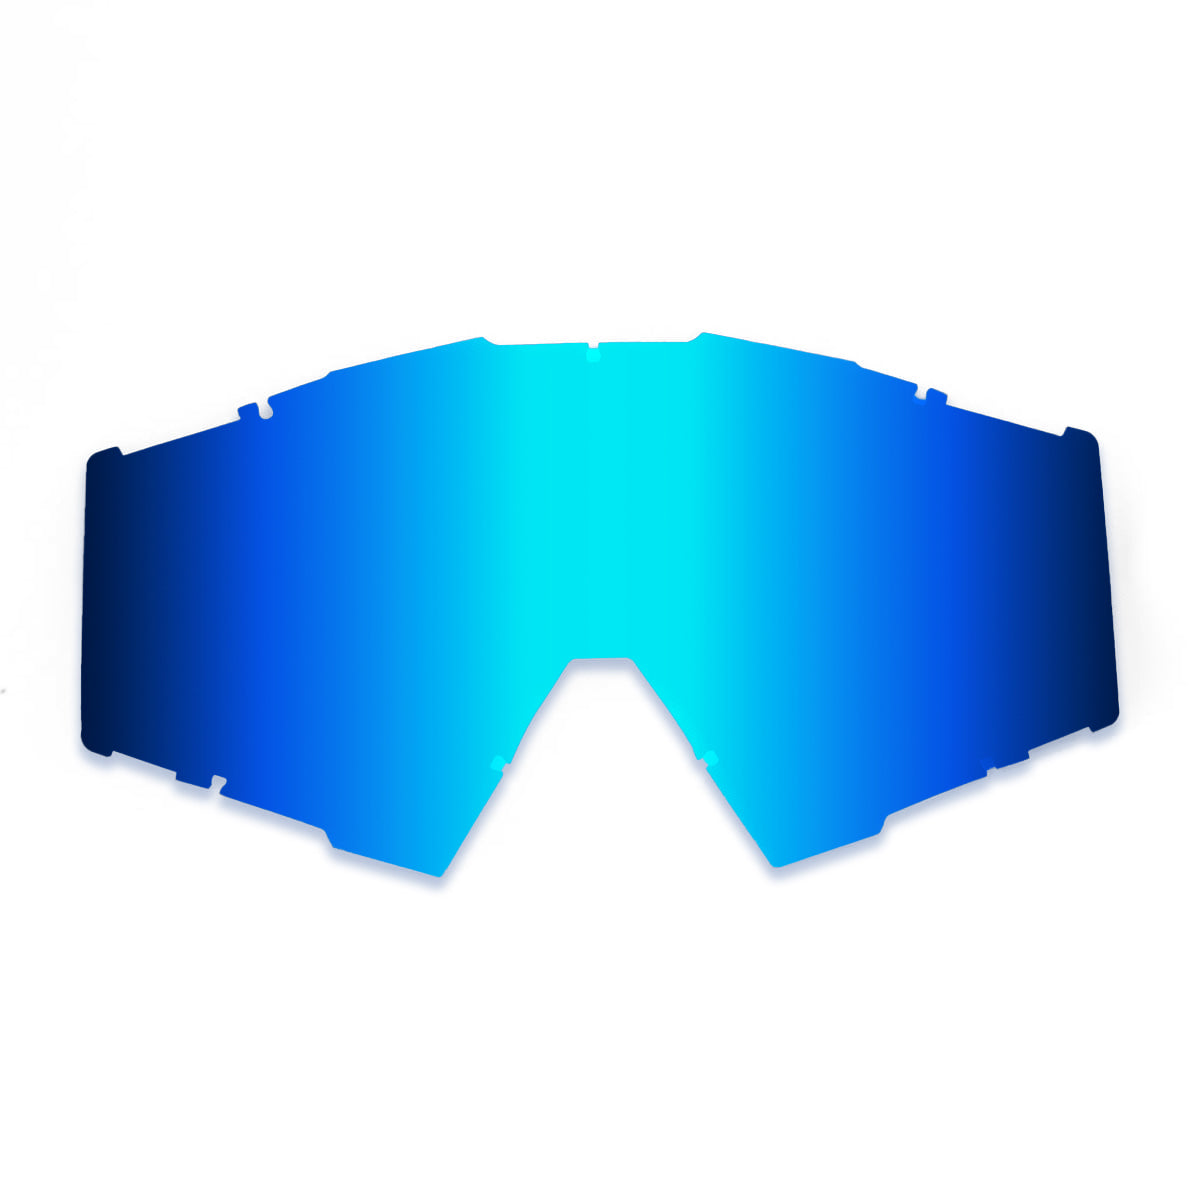 Voss One Mx Goggles Replacement Lenses